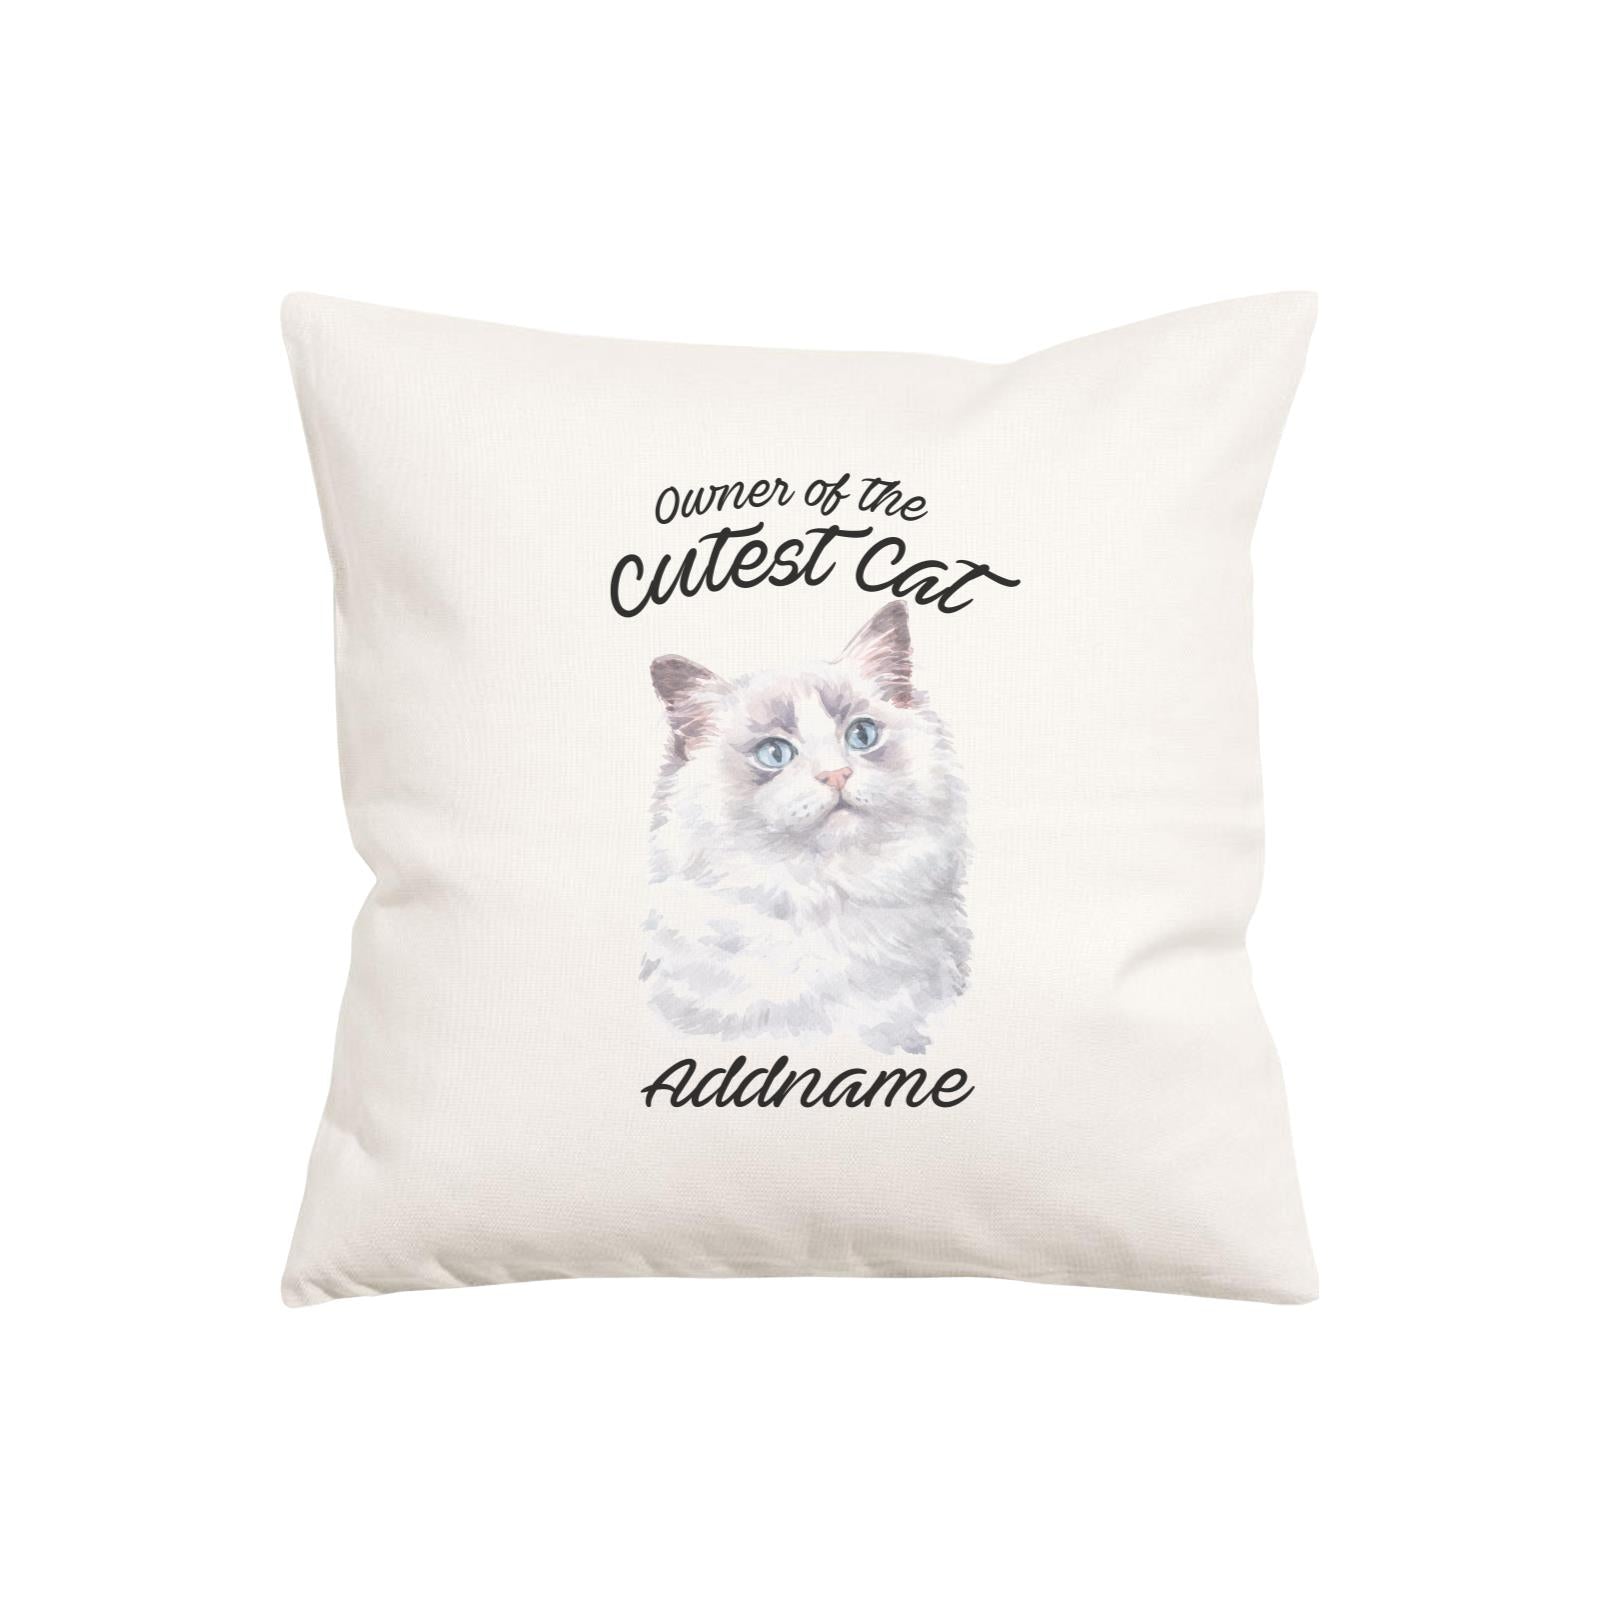 Watercolor Owner Of The Cutest Cat Ragdoll White Addname Pillow Cushion